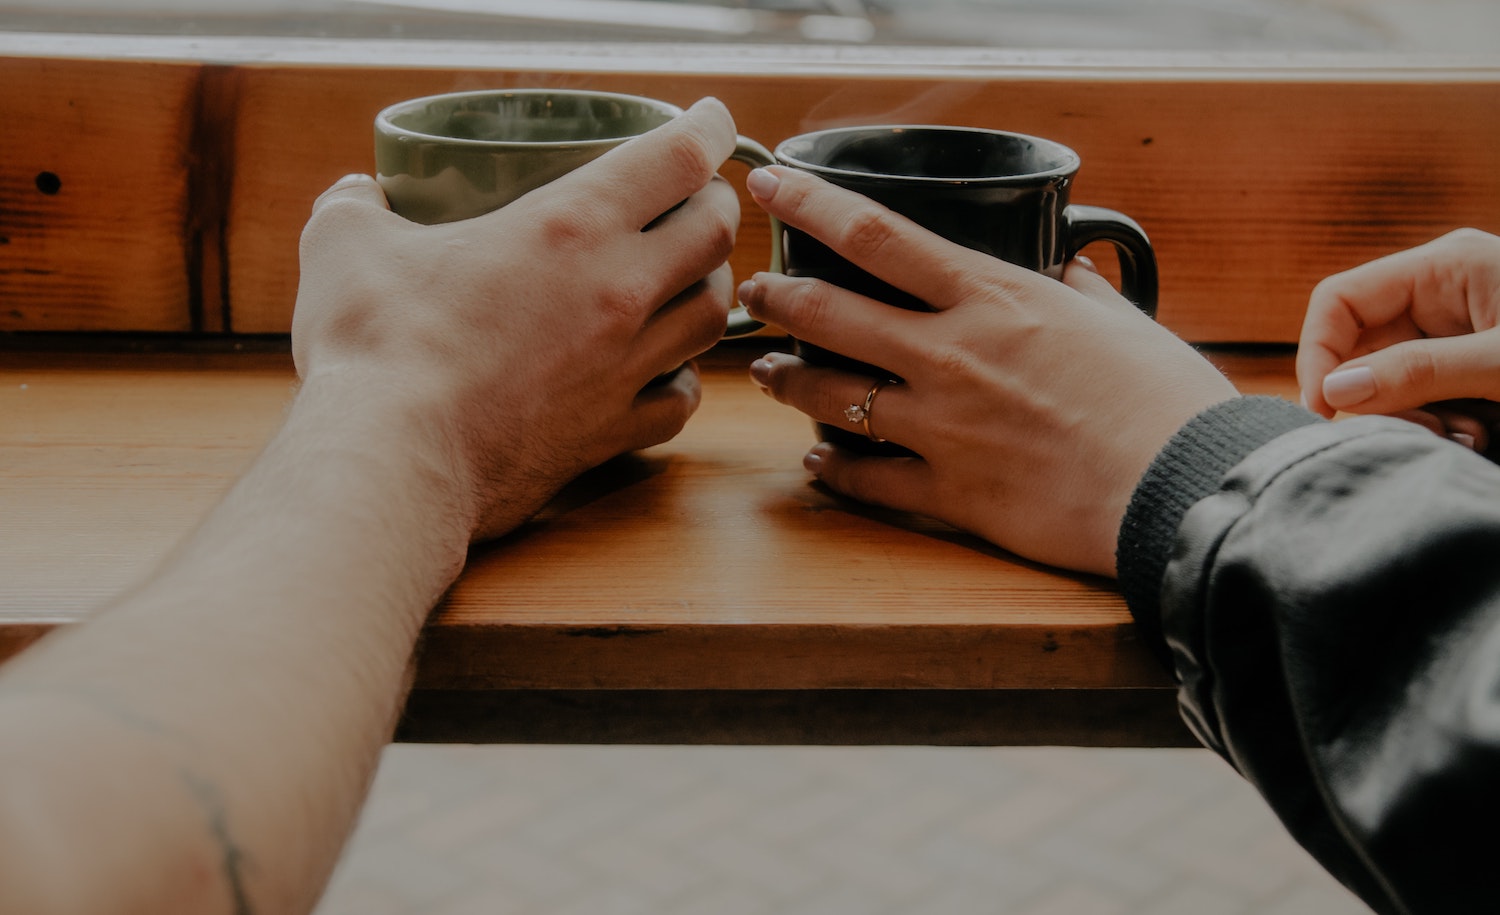 Two highly sensitive people touch hands over coffee in a time of crisis